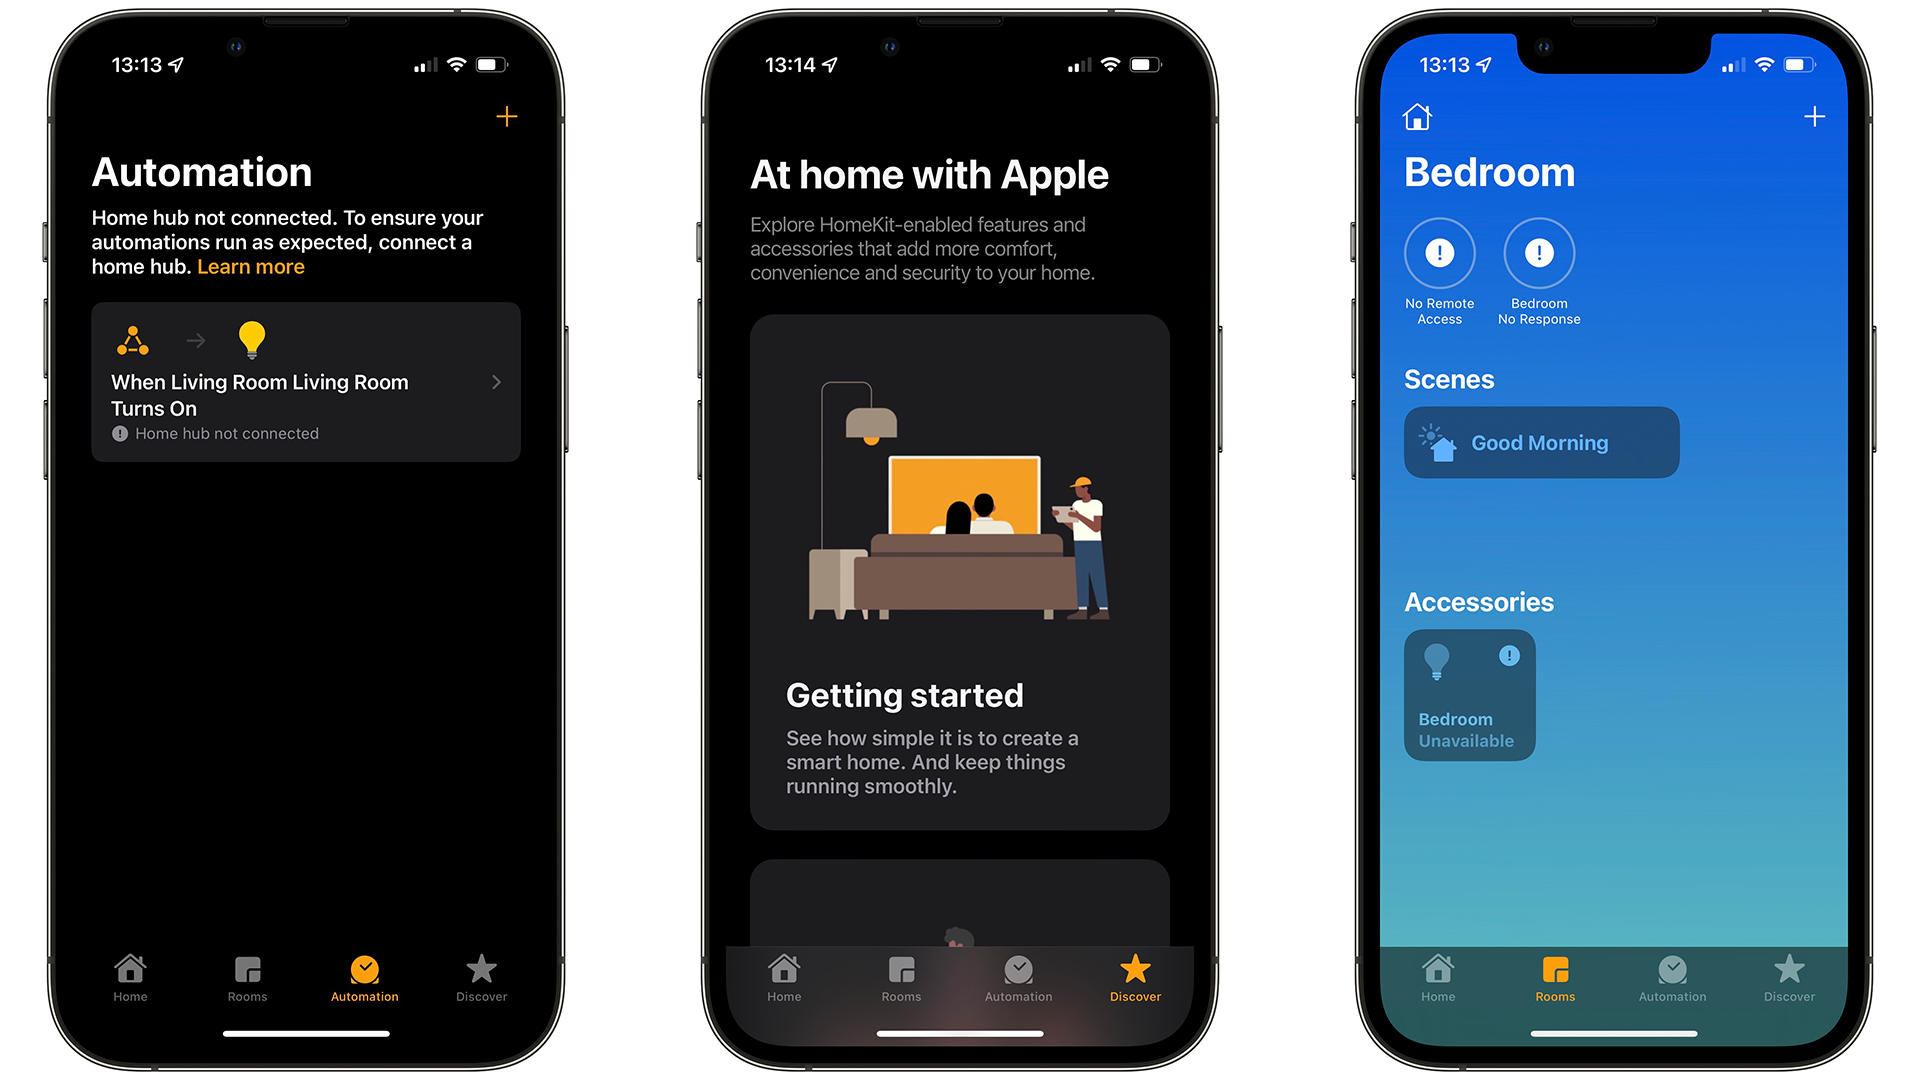 Using the Home app on an iPhone 13 Pro in iOS 15